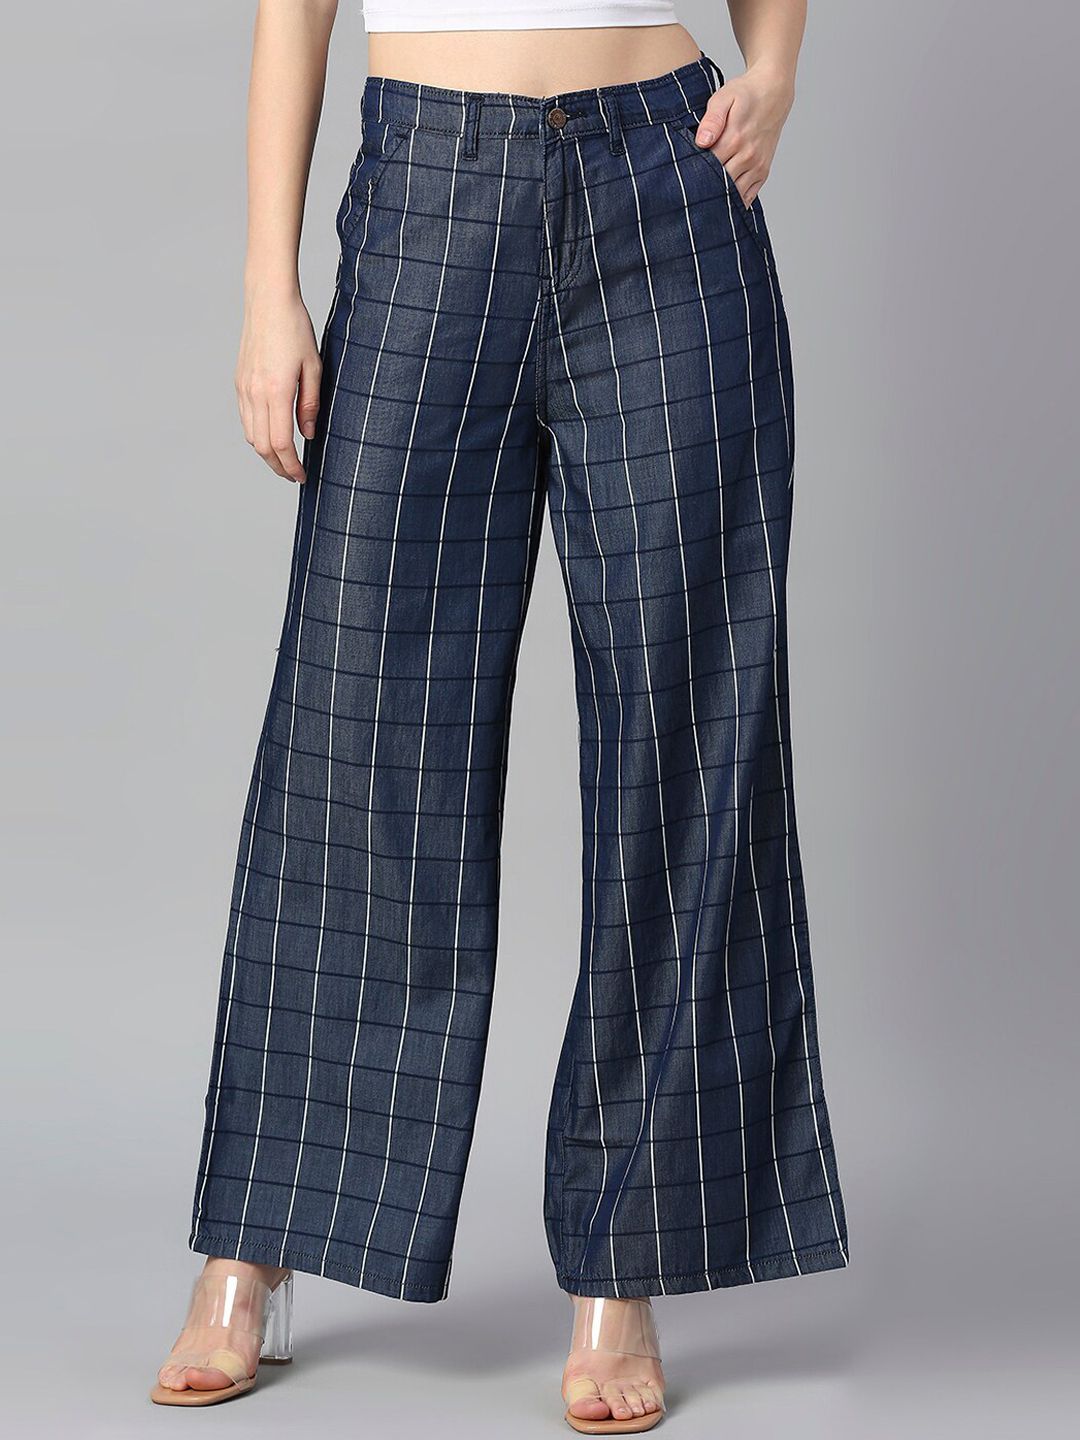 High Star Women Grey Striped Flared High-Rise Trousers Price in India